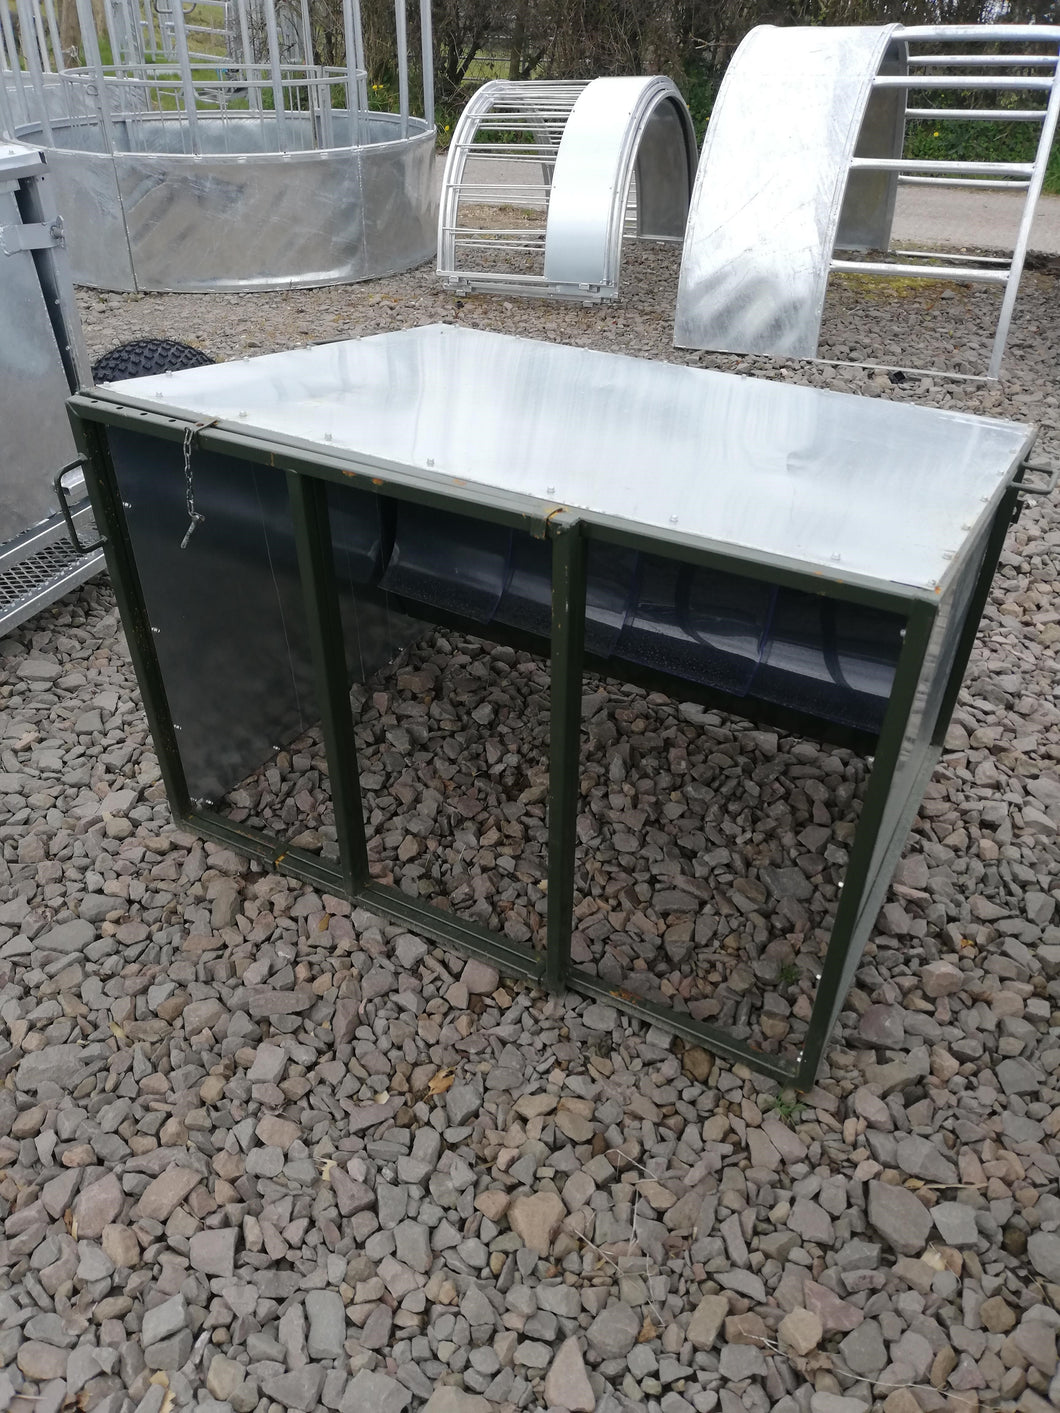 4 x 4' Sheep Creep Feeder Painted / Galvanised from Leam Agri Ltd, Tempo, County Fermanagh, Northern Ireland. Serving Fermanagh, Tyrone, Antrim, Down, Londonderry, Armagh, Cavan, Leitrim, Sligo, Monaghan, Donegal, Dublin Carlow, Clare, Cork, Galway, Kerry, Kildare, Kilkenny, Laois, Limerick, Longford, Louth, Mayo, Meath, Monaghan, Offaly, Roscommon, Tipperary, Waterford, Westmeath, Wexford and Wicklow and throughout the United Kingdom